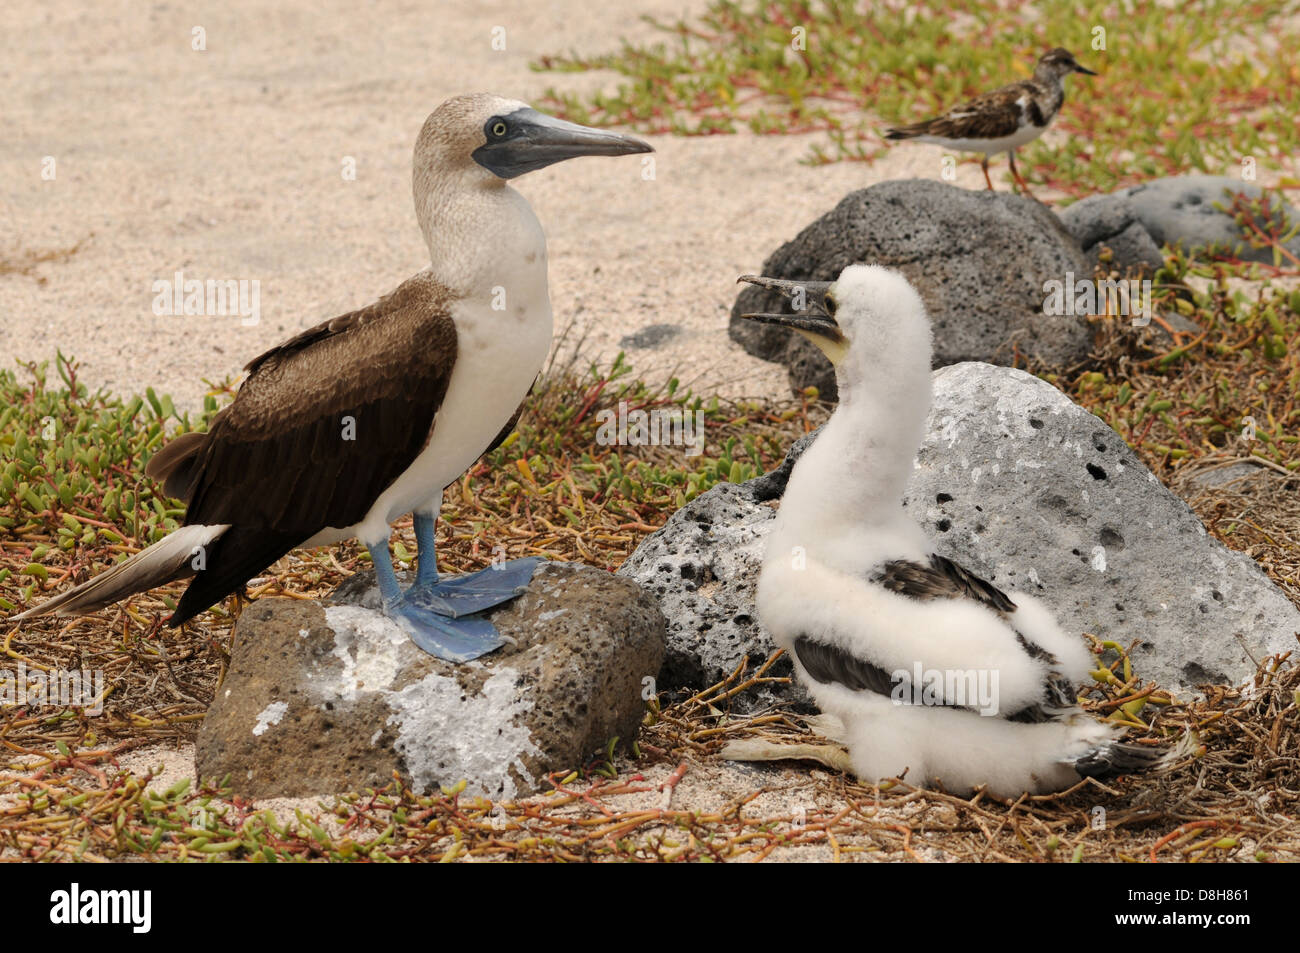 Blue-footed booby with offspring Stock Photo